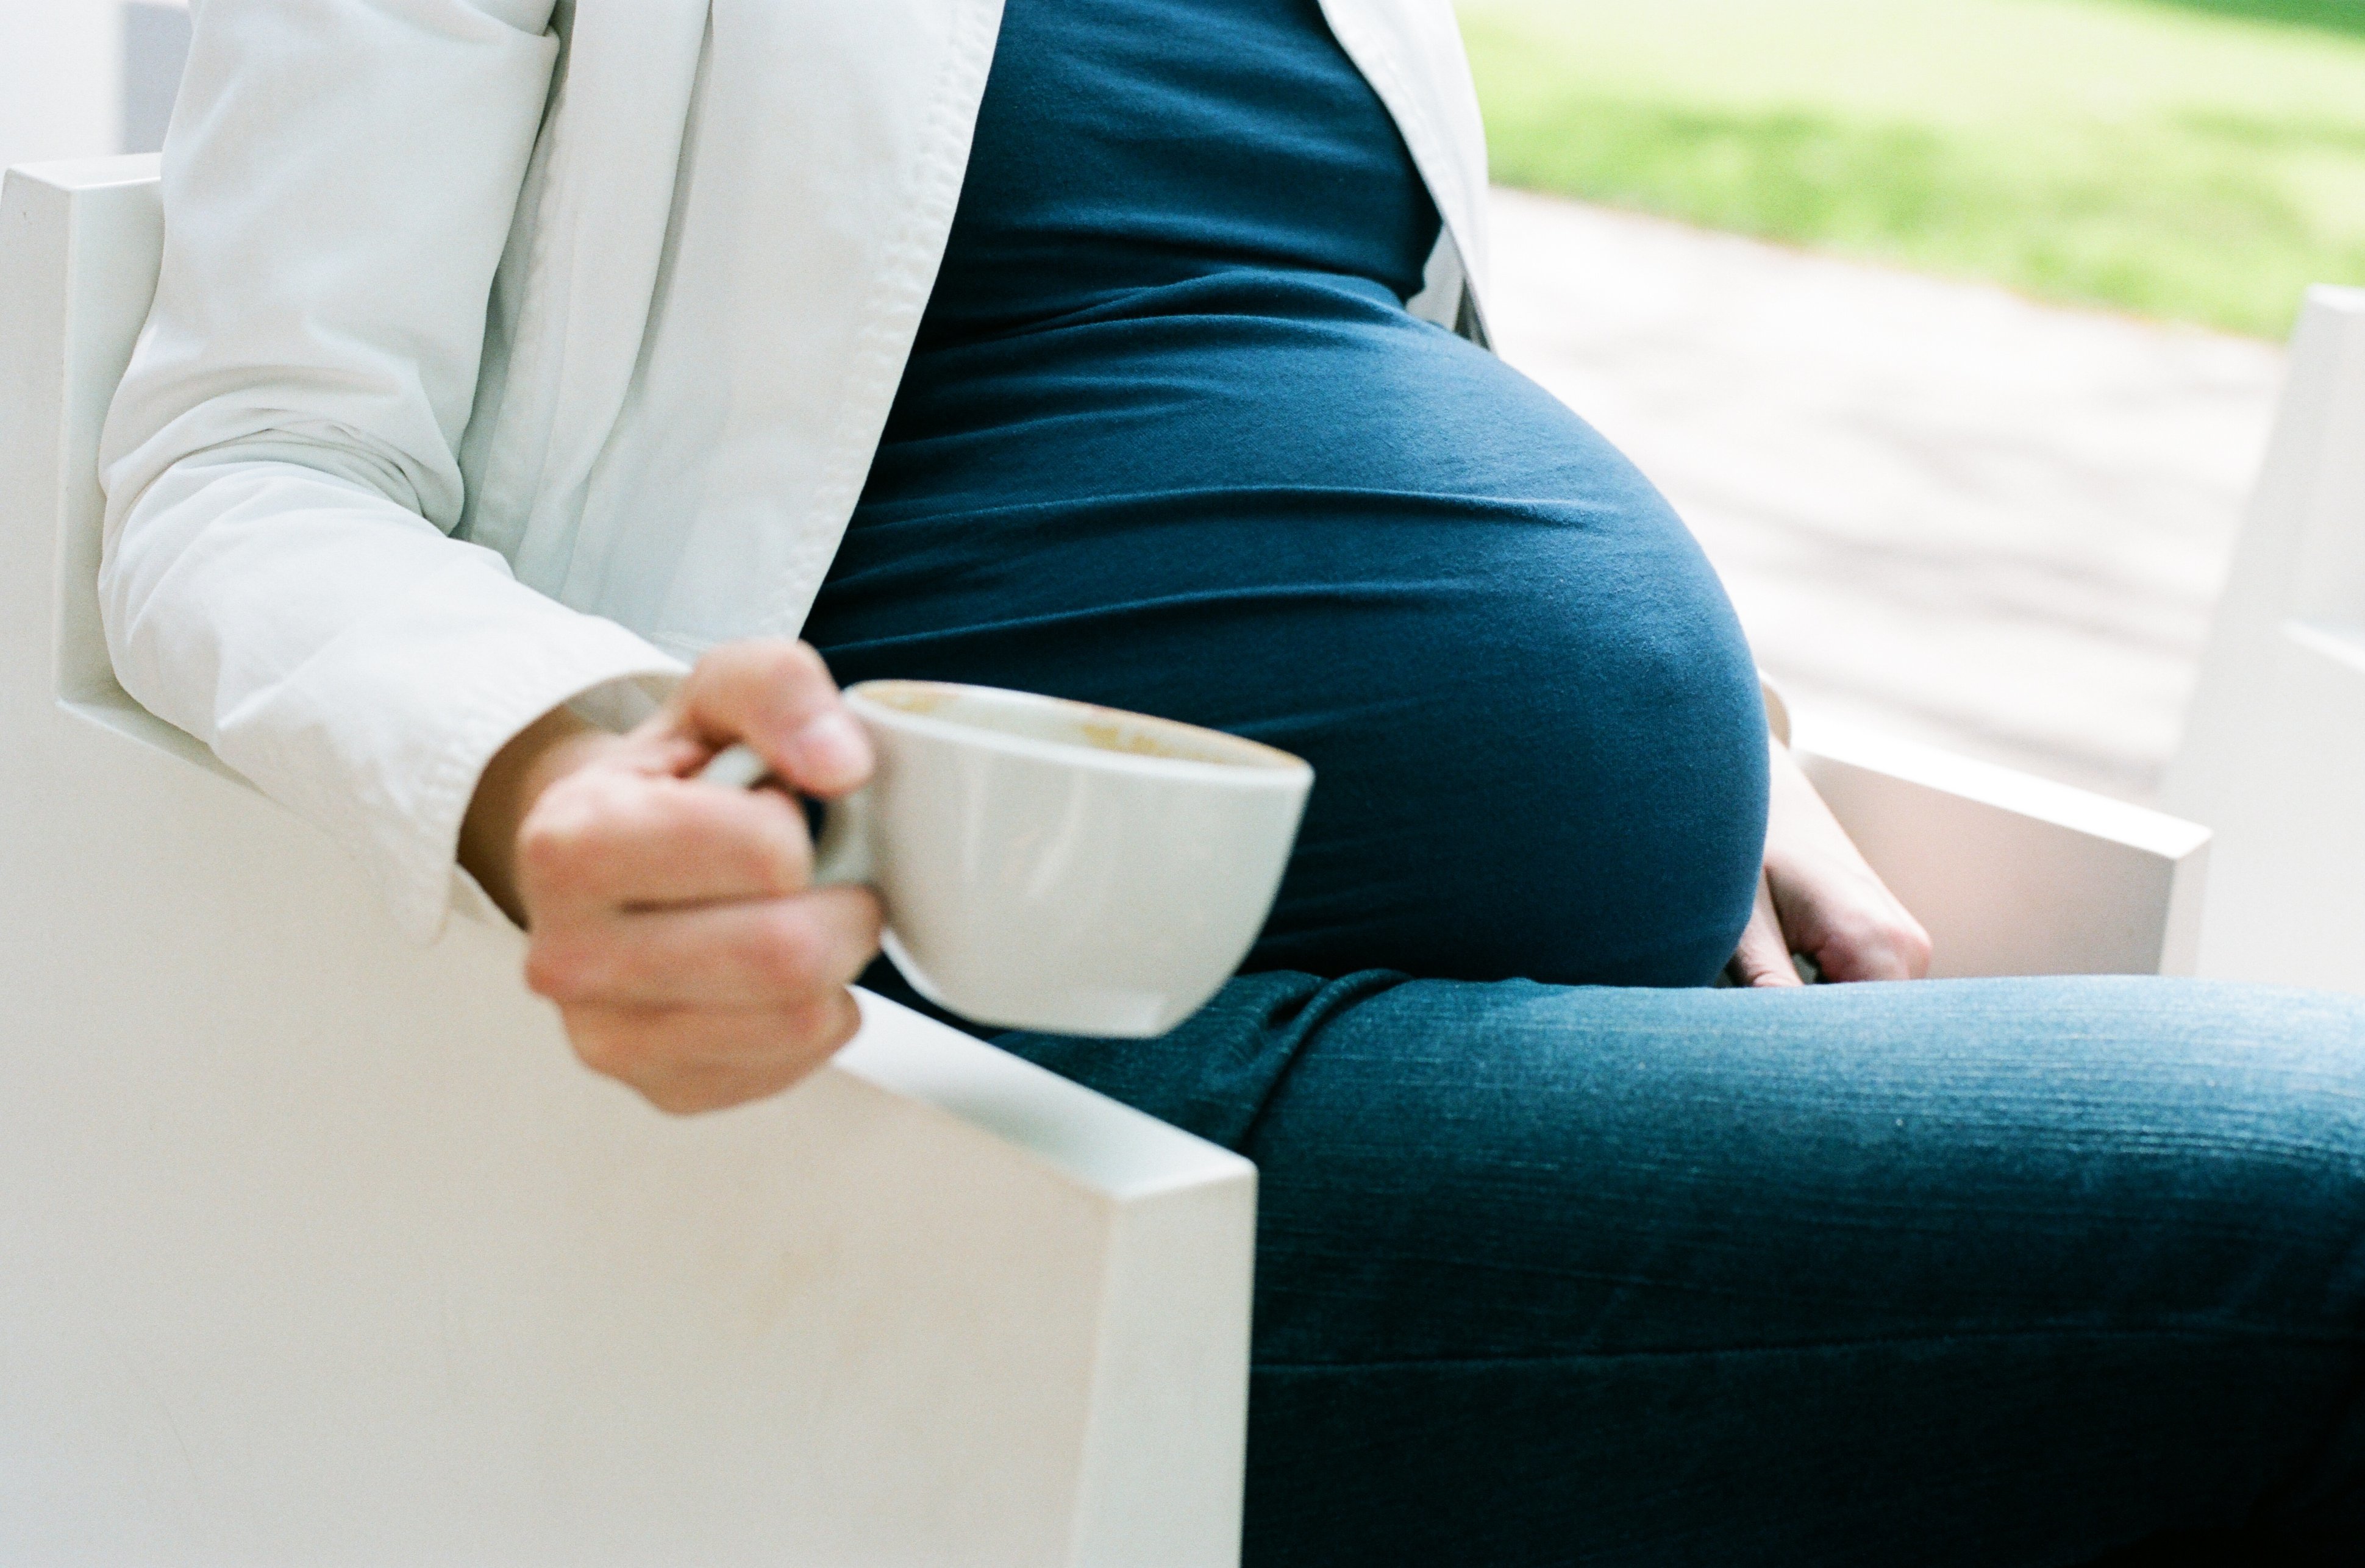 is wine safe to drink while pregnant